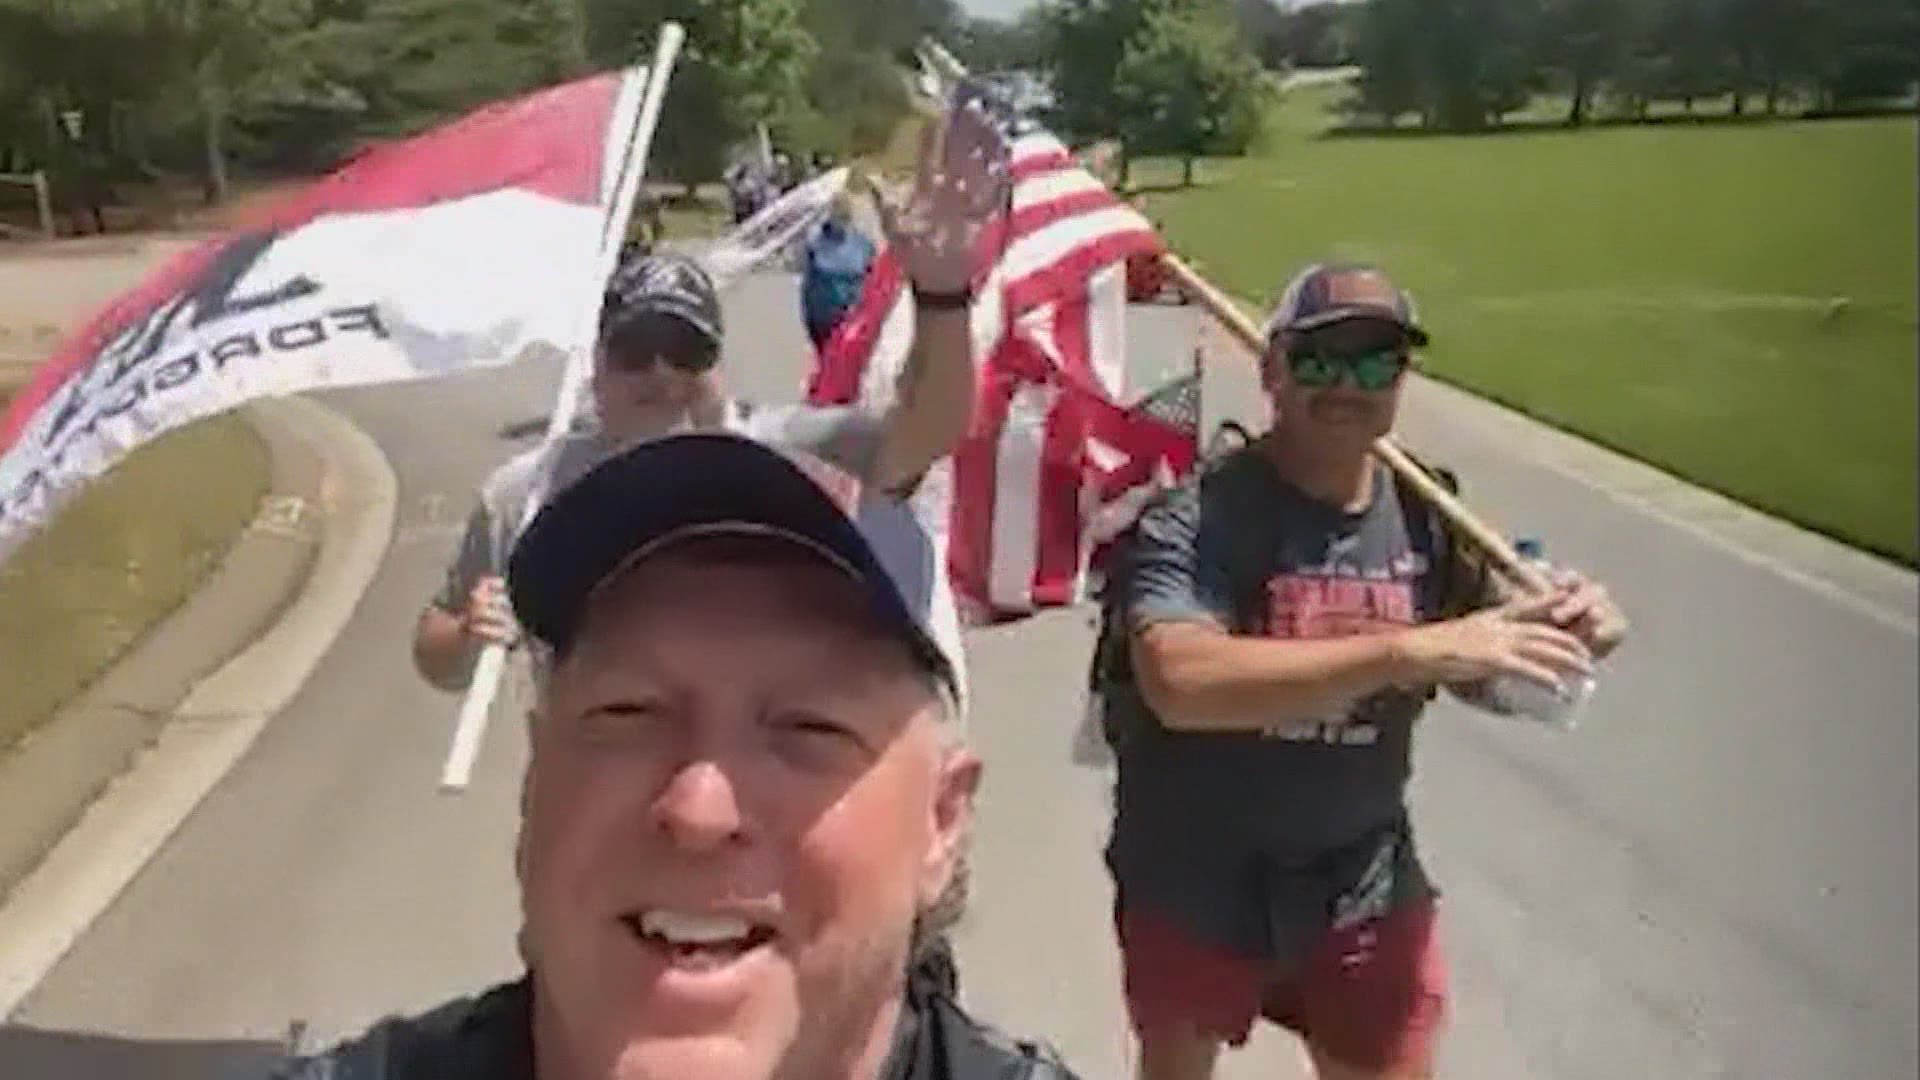 David Lindsey has walked 170 miles so far in his Carry The Load journey. He remembers and honors firefighters and other heroes who gave the ultimate sacrifice.